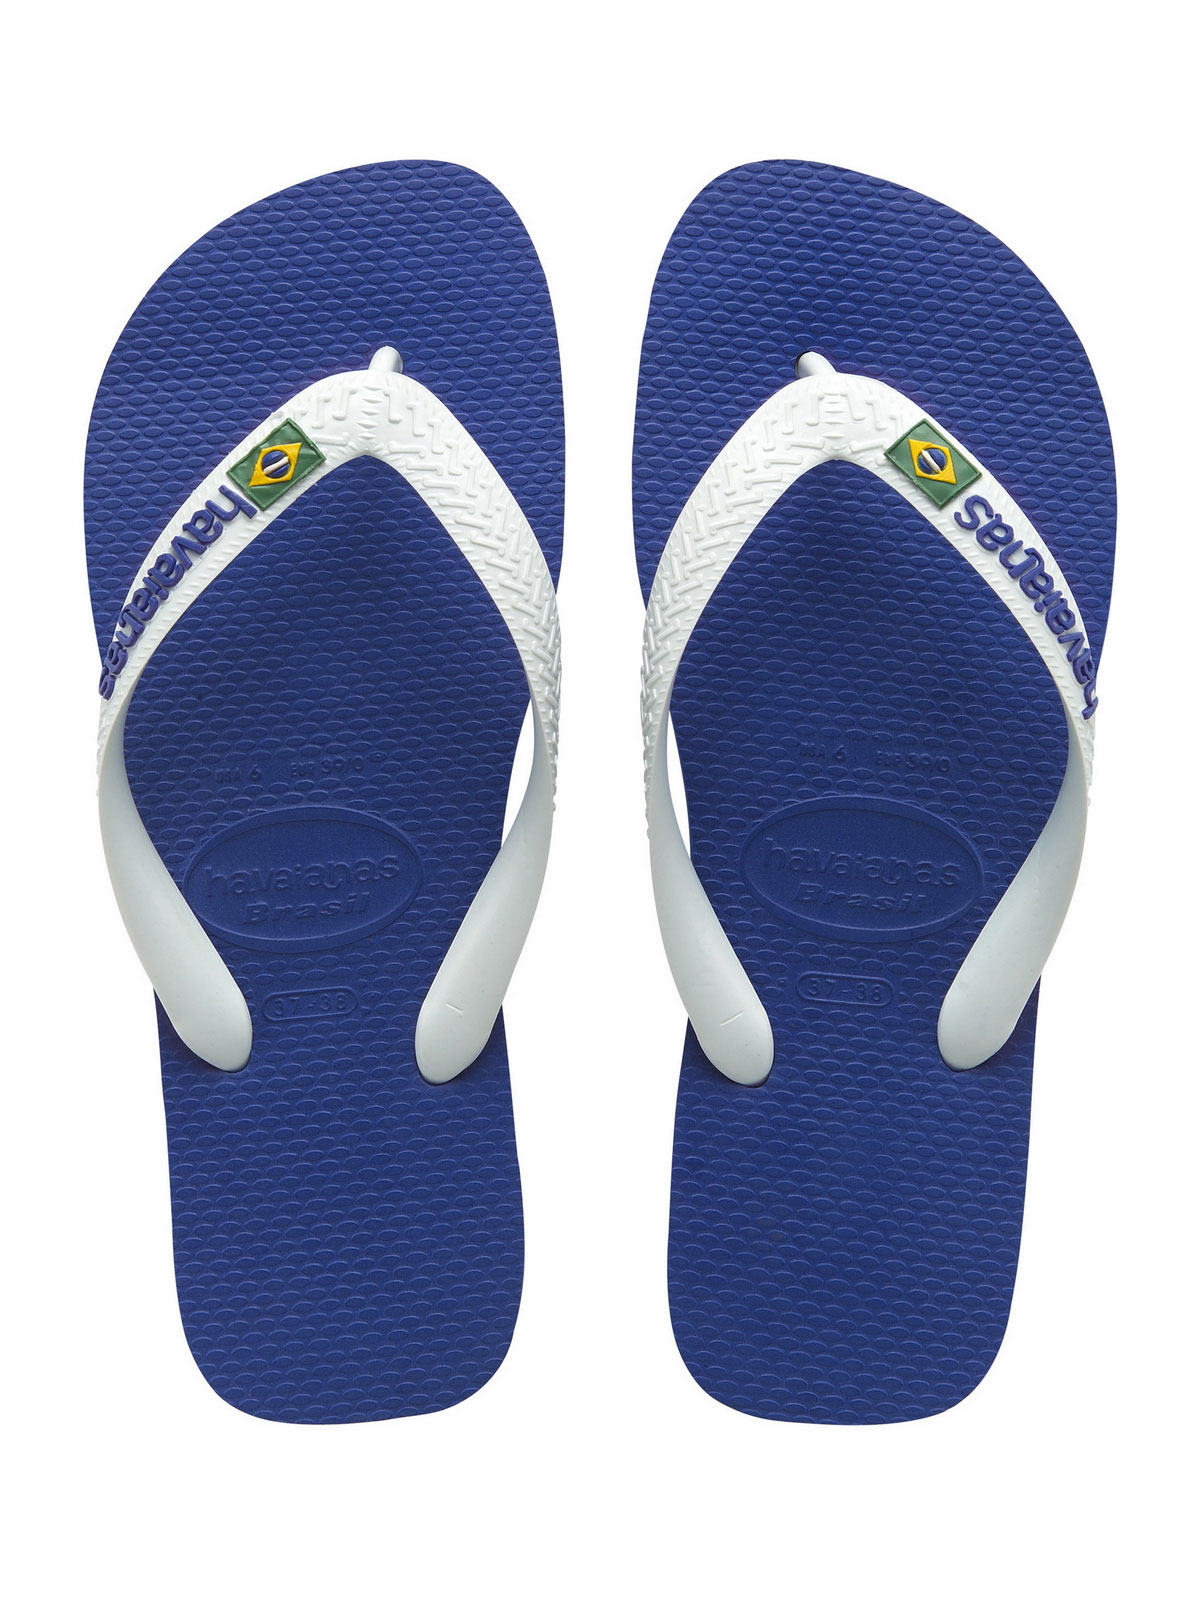 Blue And White Flip Flops  From Havaianas With Logo  